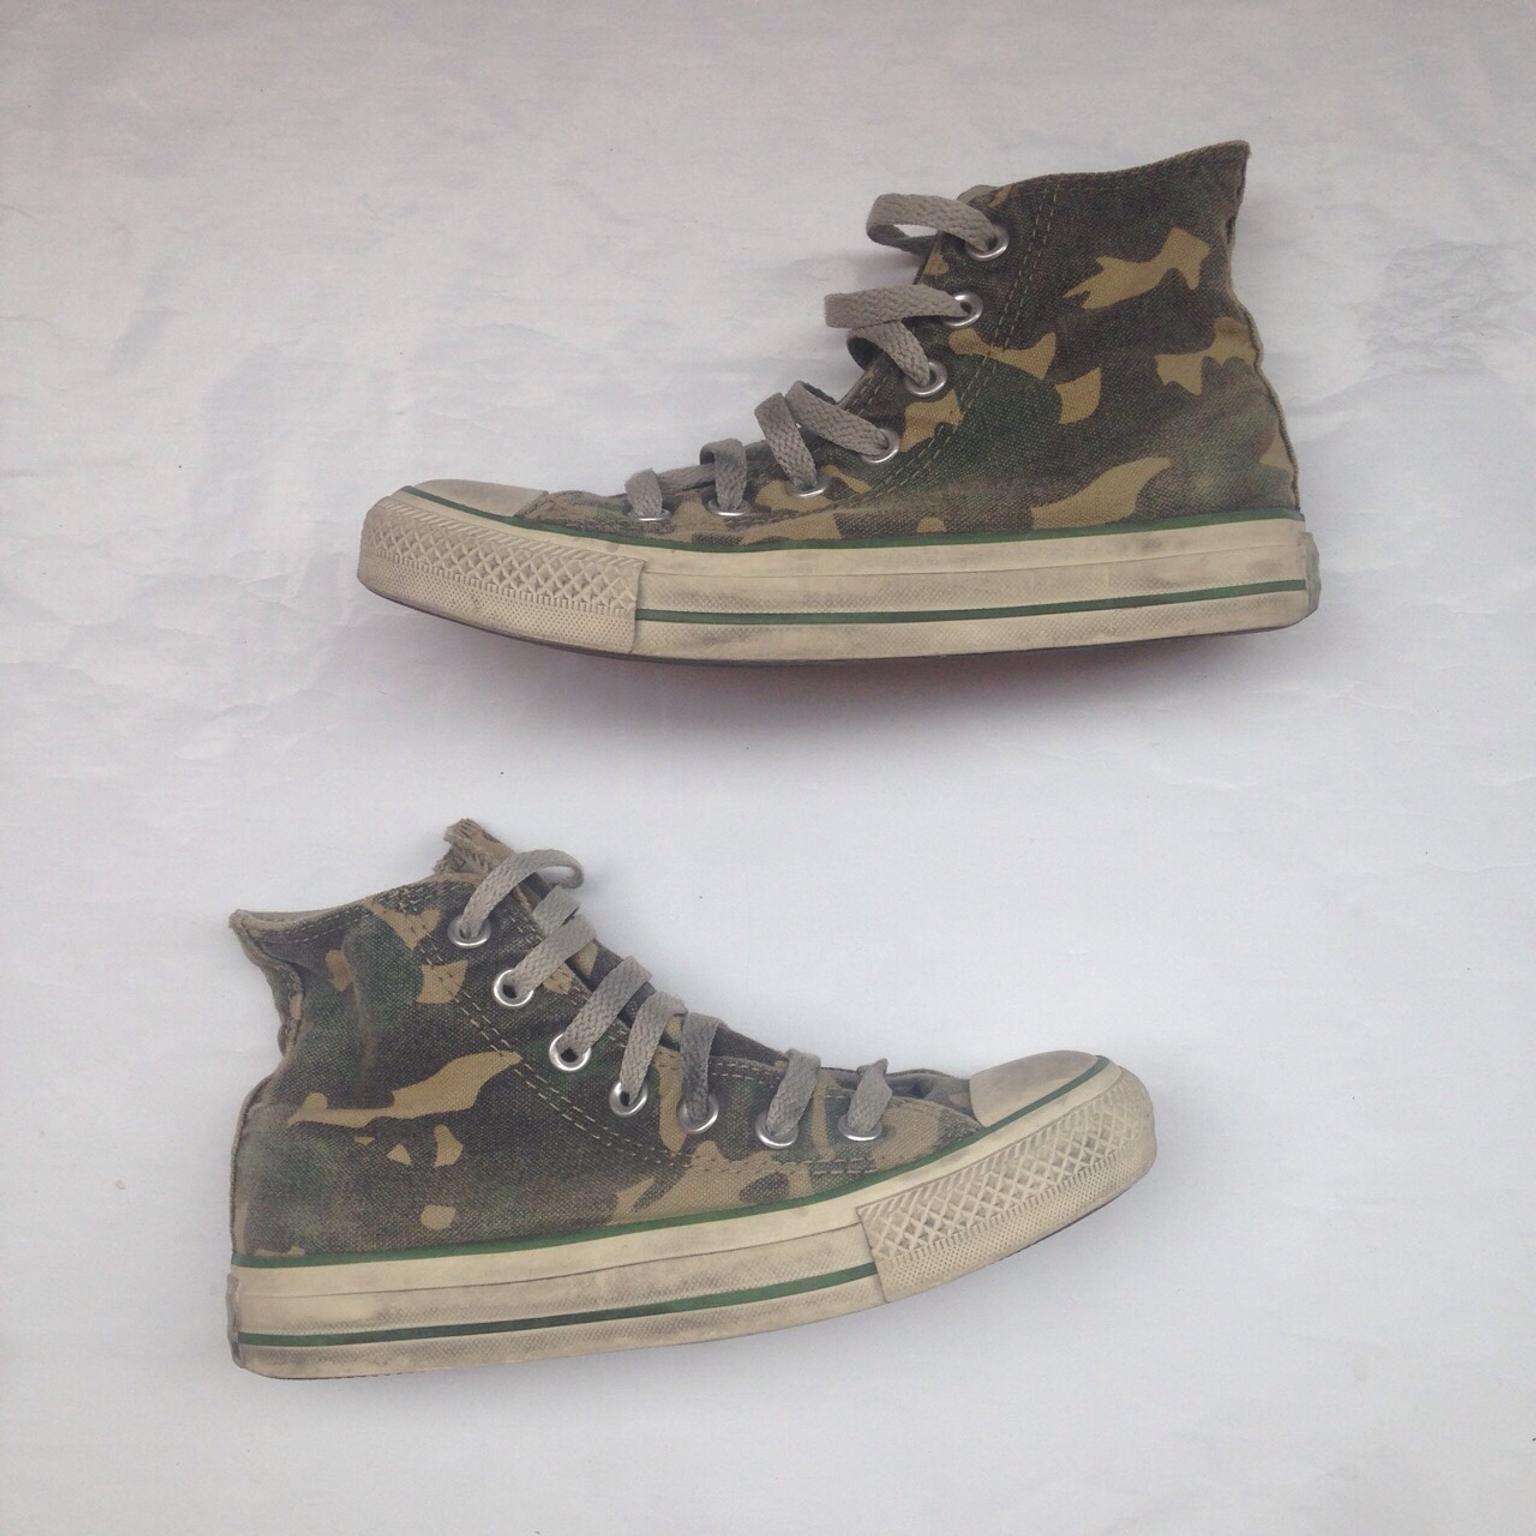 Converse limited edition militari in 35133 Cadoneghe for €130.00 for sale |  Shpock